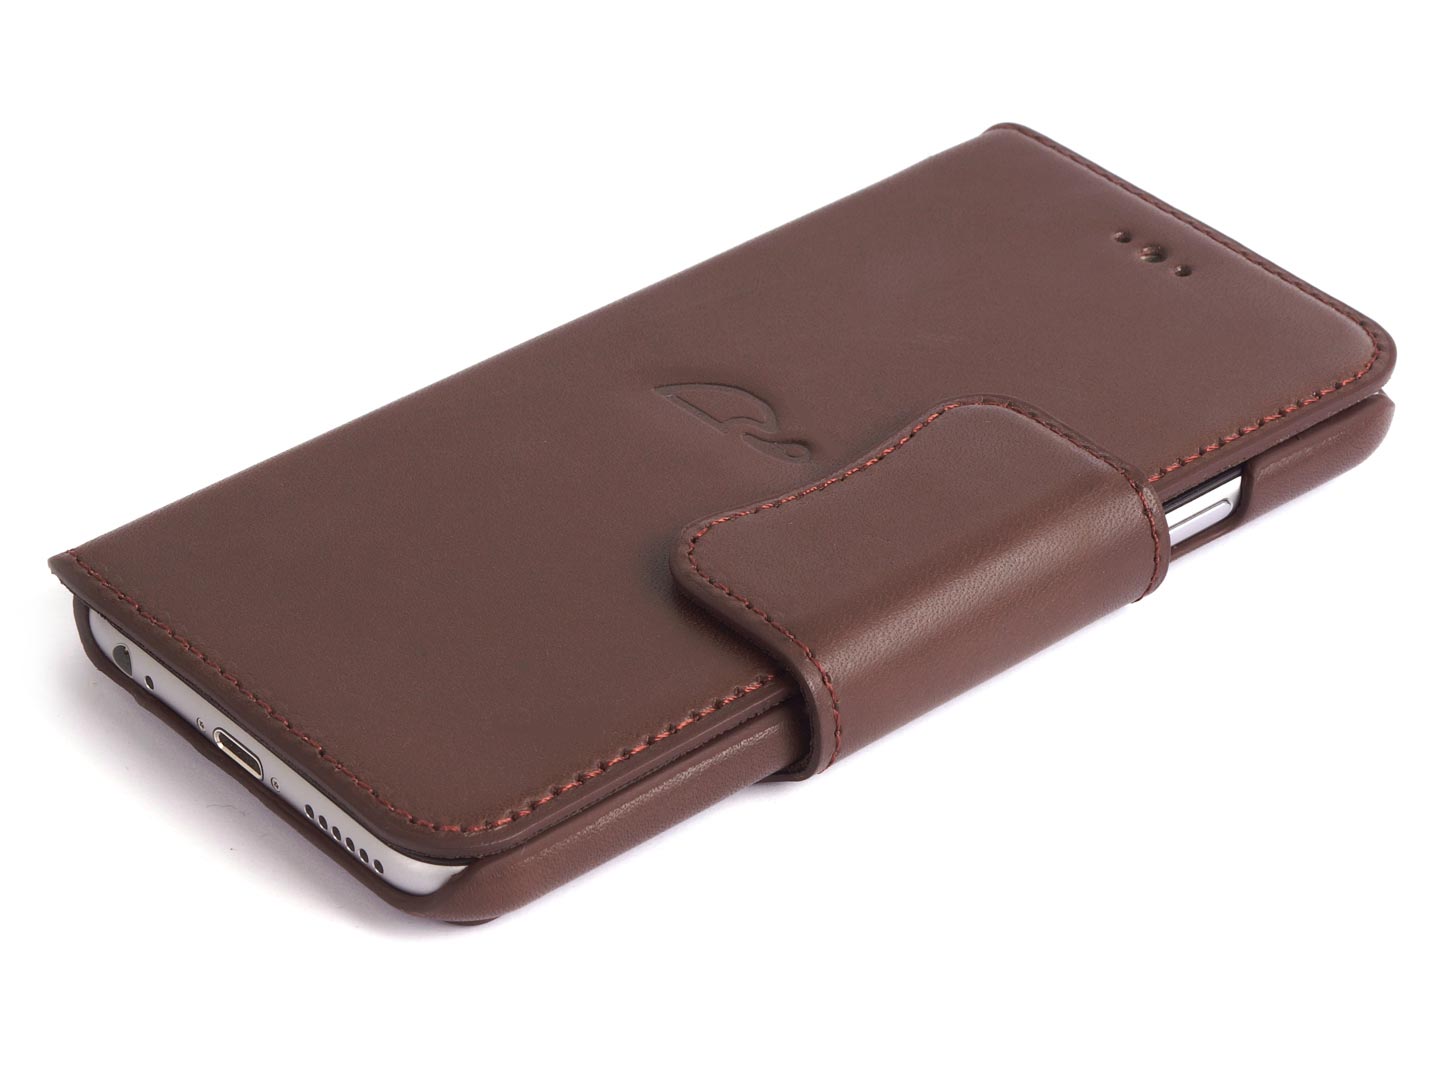 iphone 6 brown leather wallet case - Carapaz